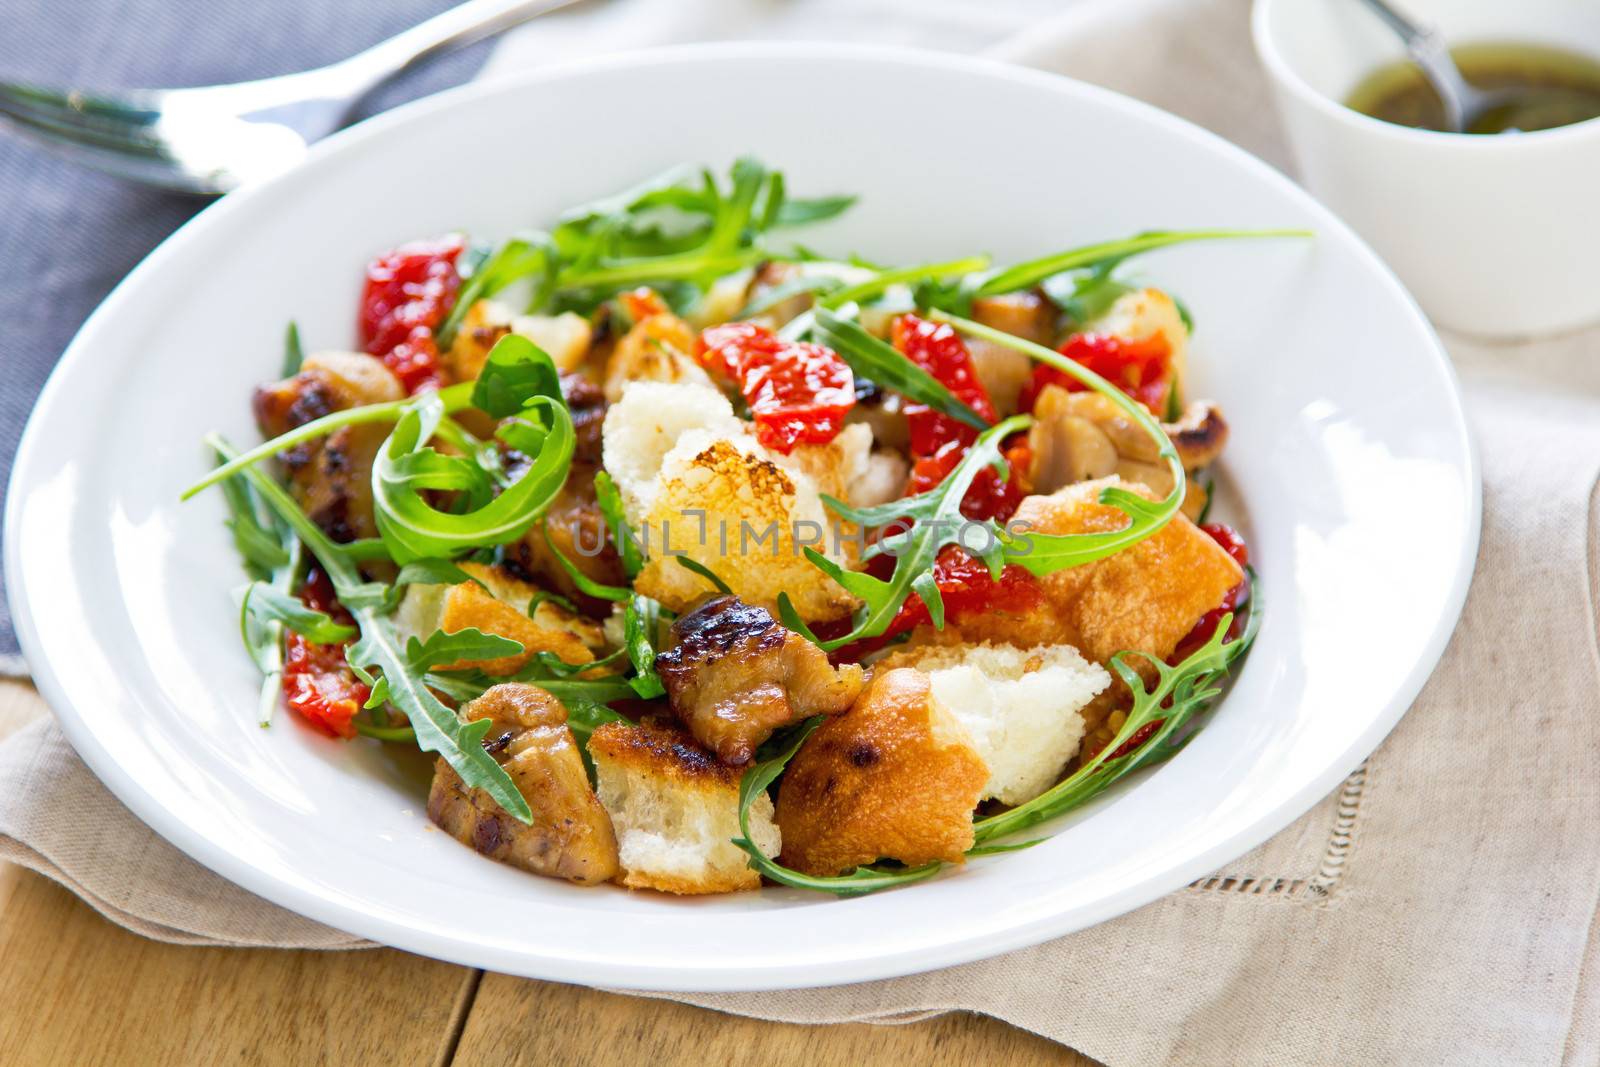 Chicken with sundried tomato and rocket salad by vanillaechoes